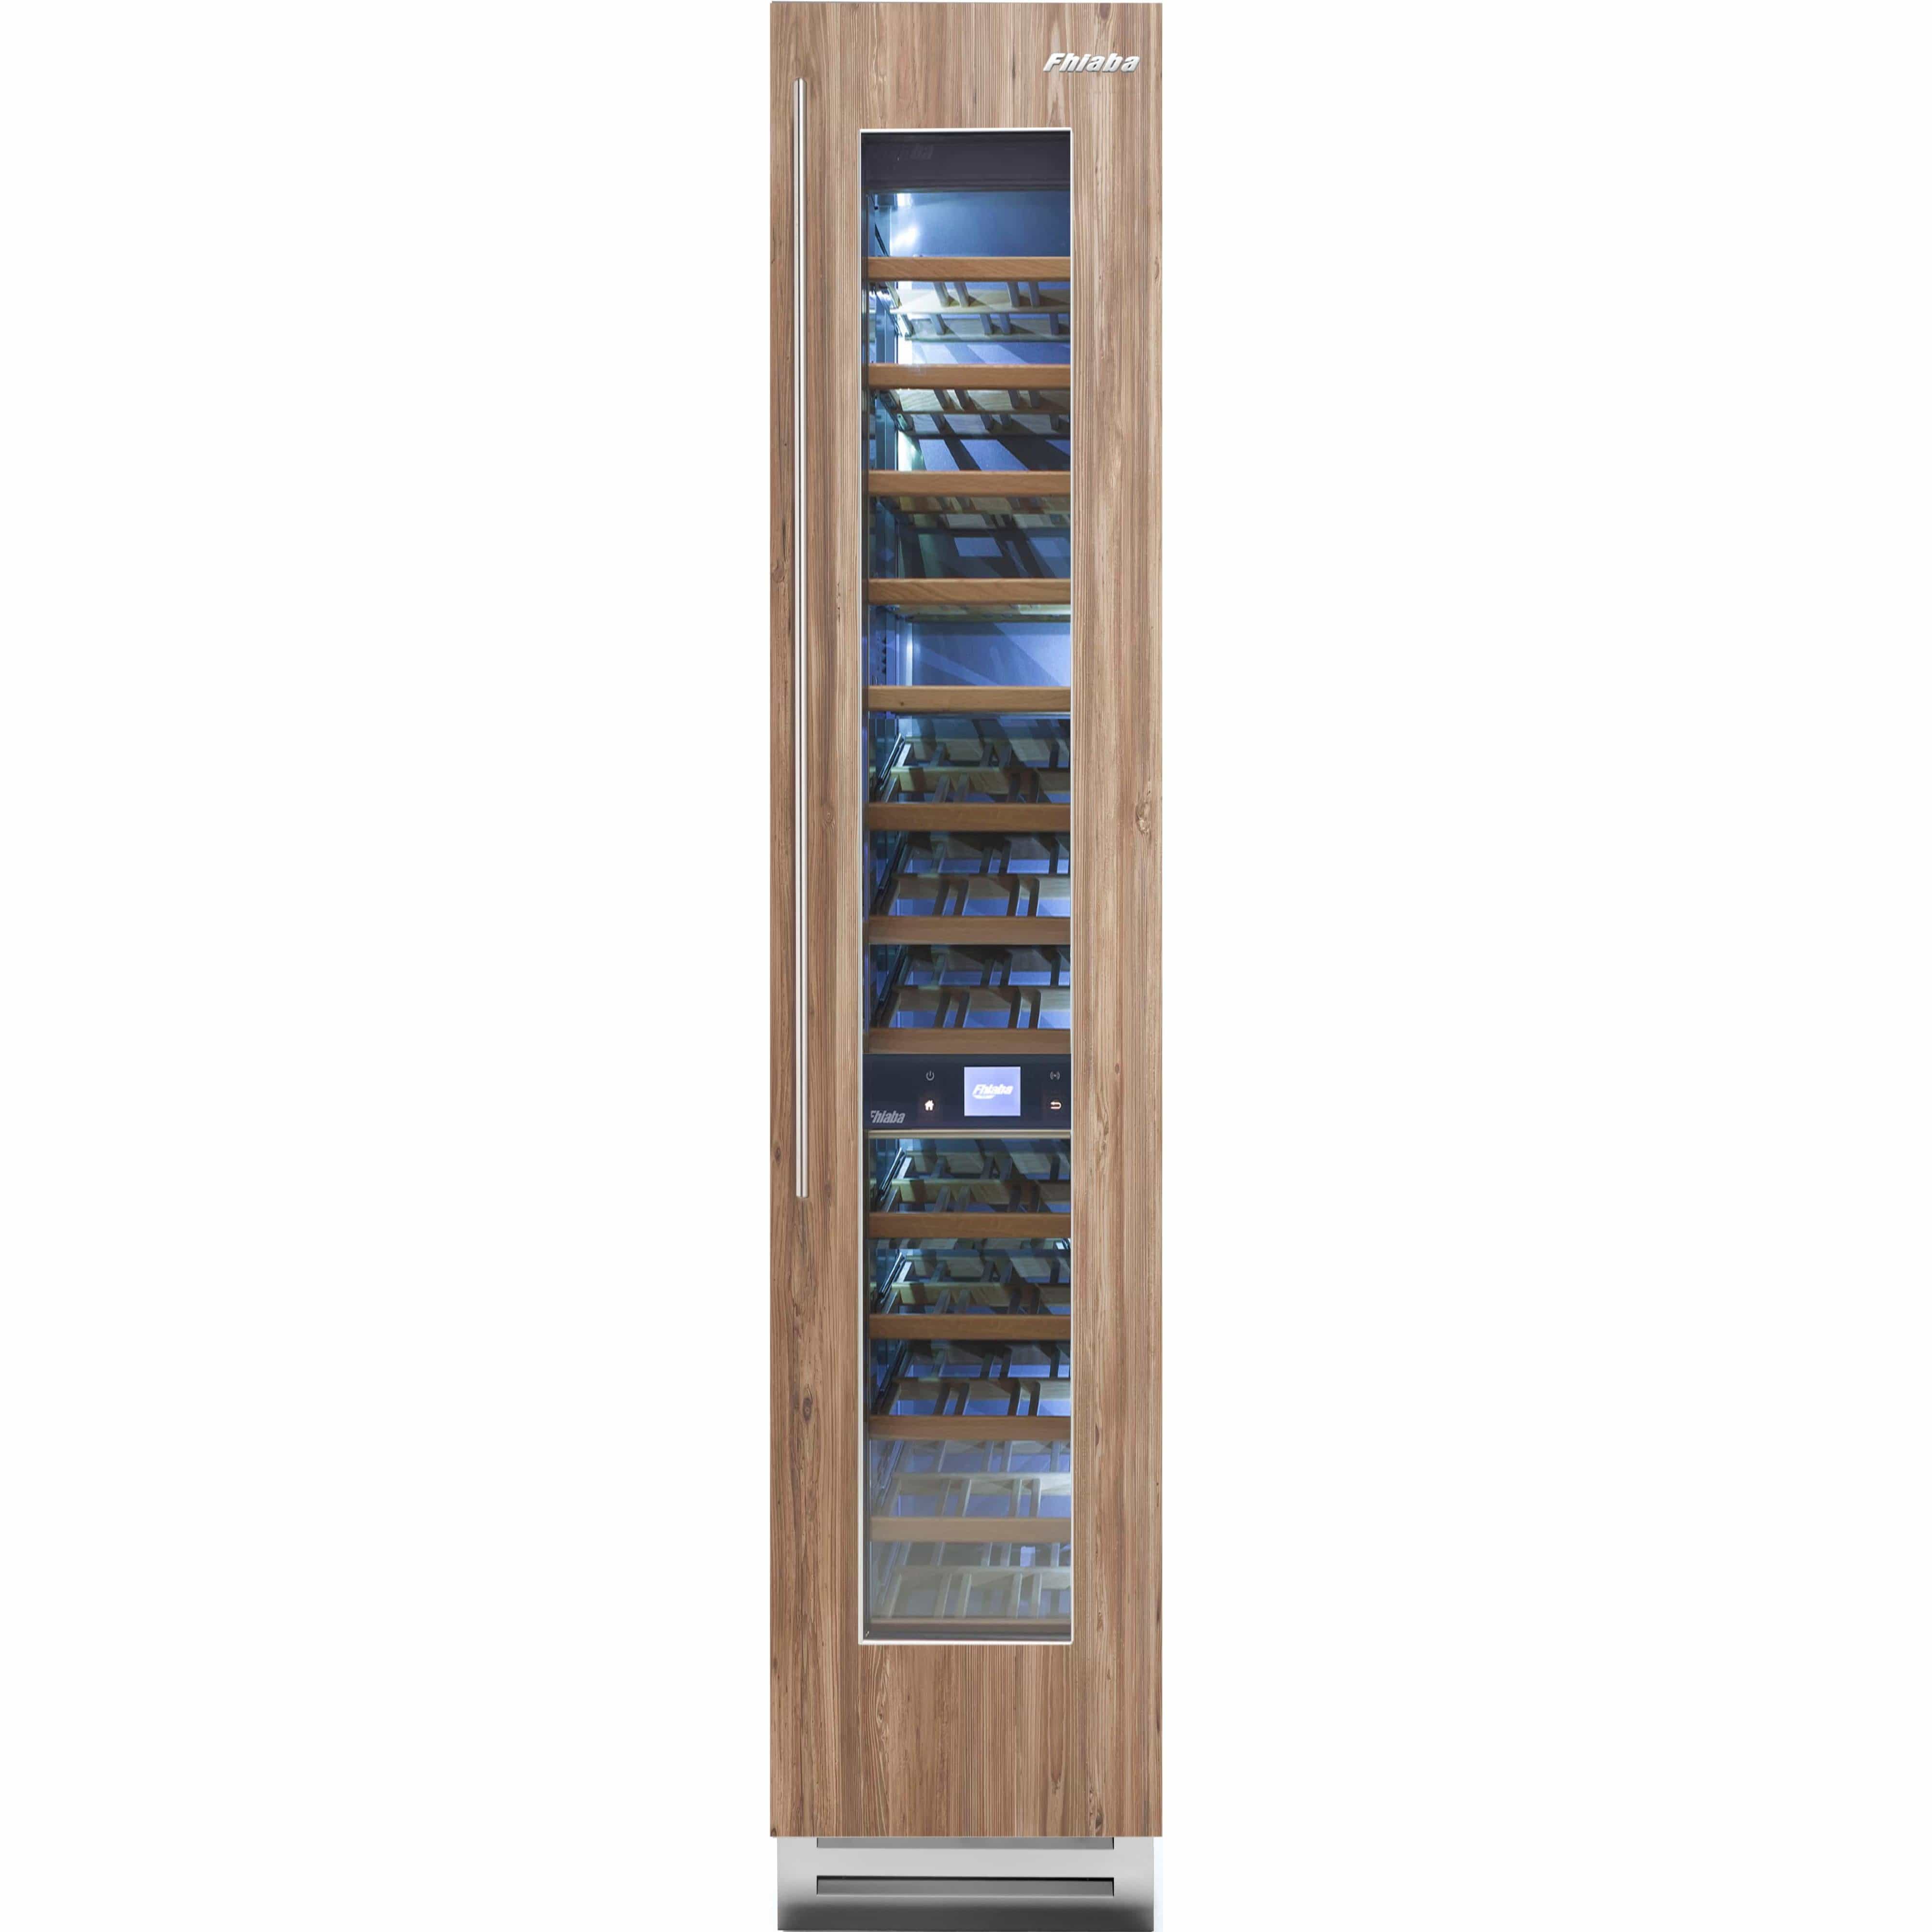 Fhiaba 52-Bottle Integrated Series Wine Cellar with Smart Touch TFT Display FI18WCC-RO2 Wine Storage FI18WCCRO2 Luxury Appliances Direct